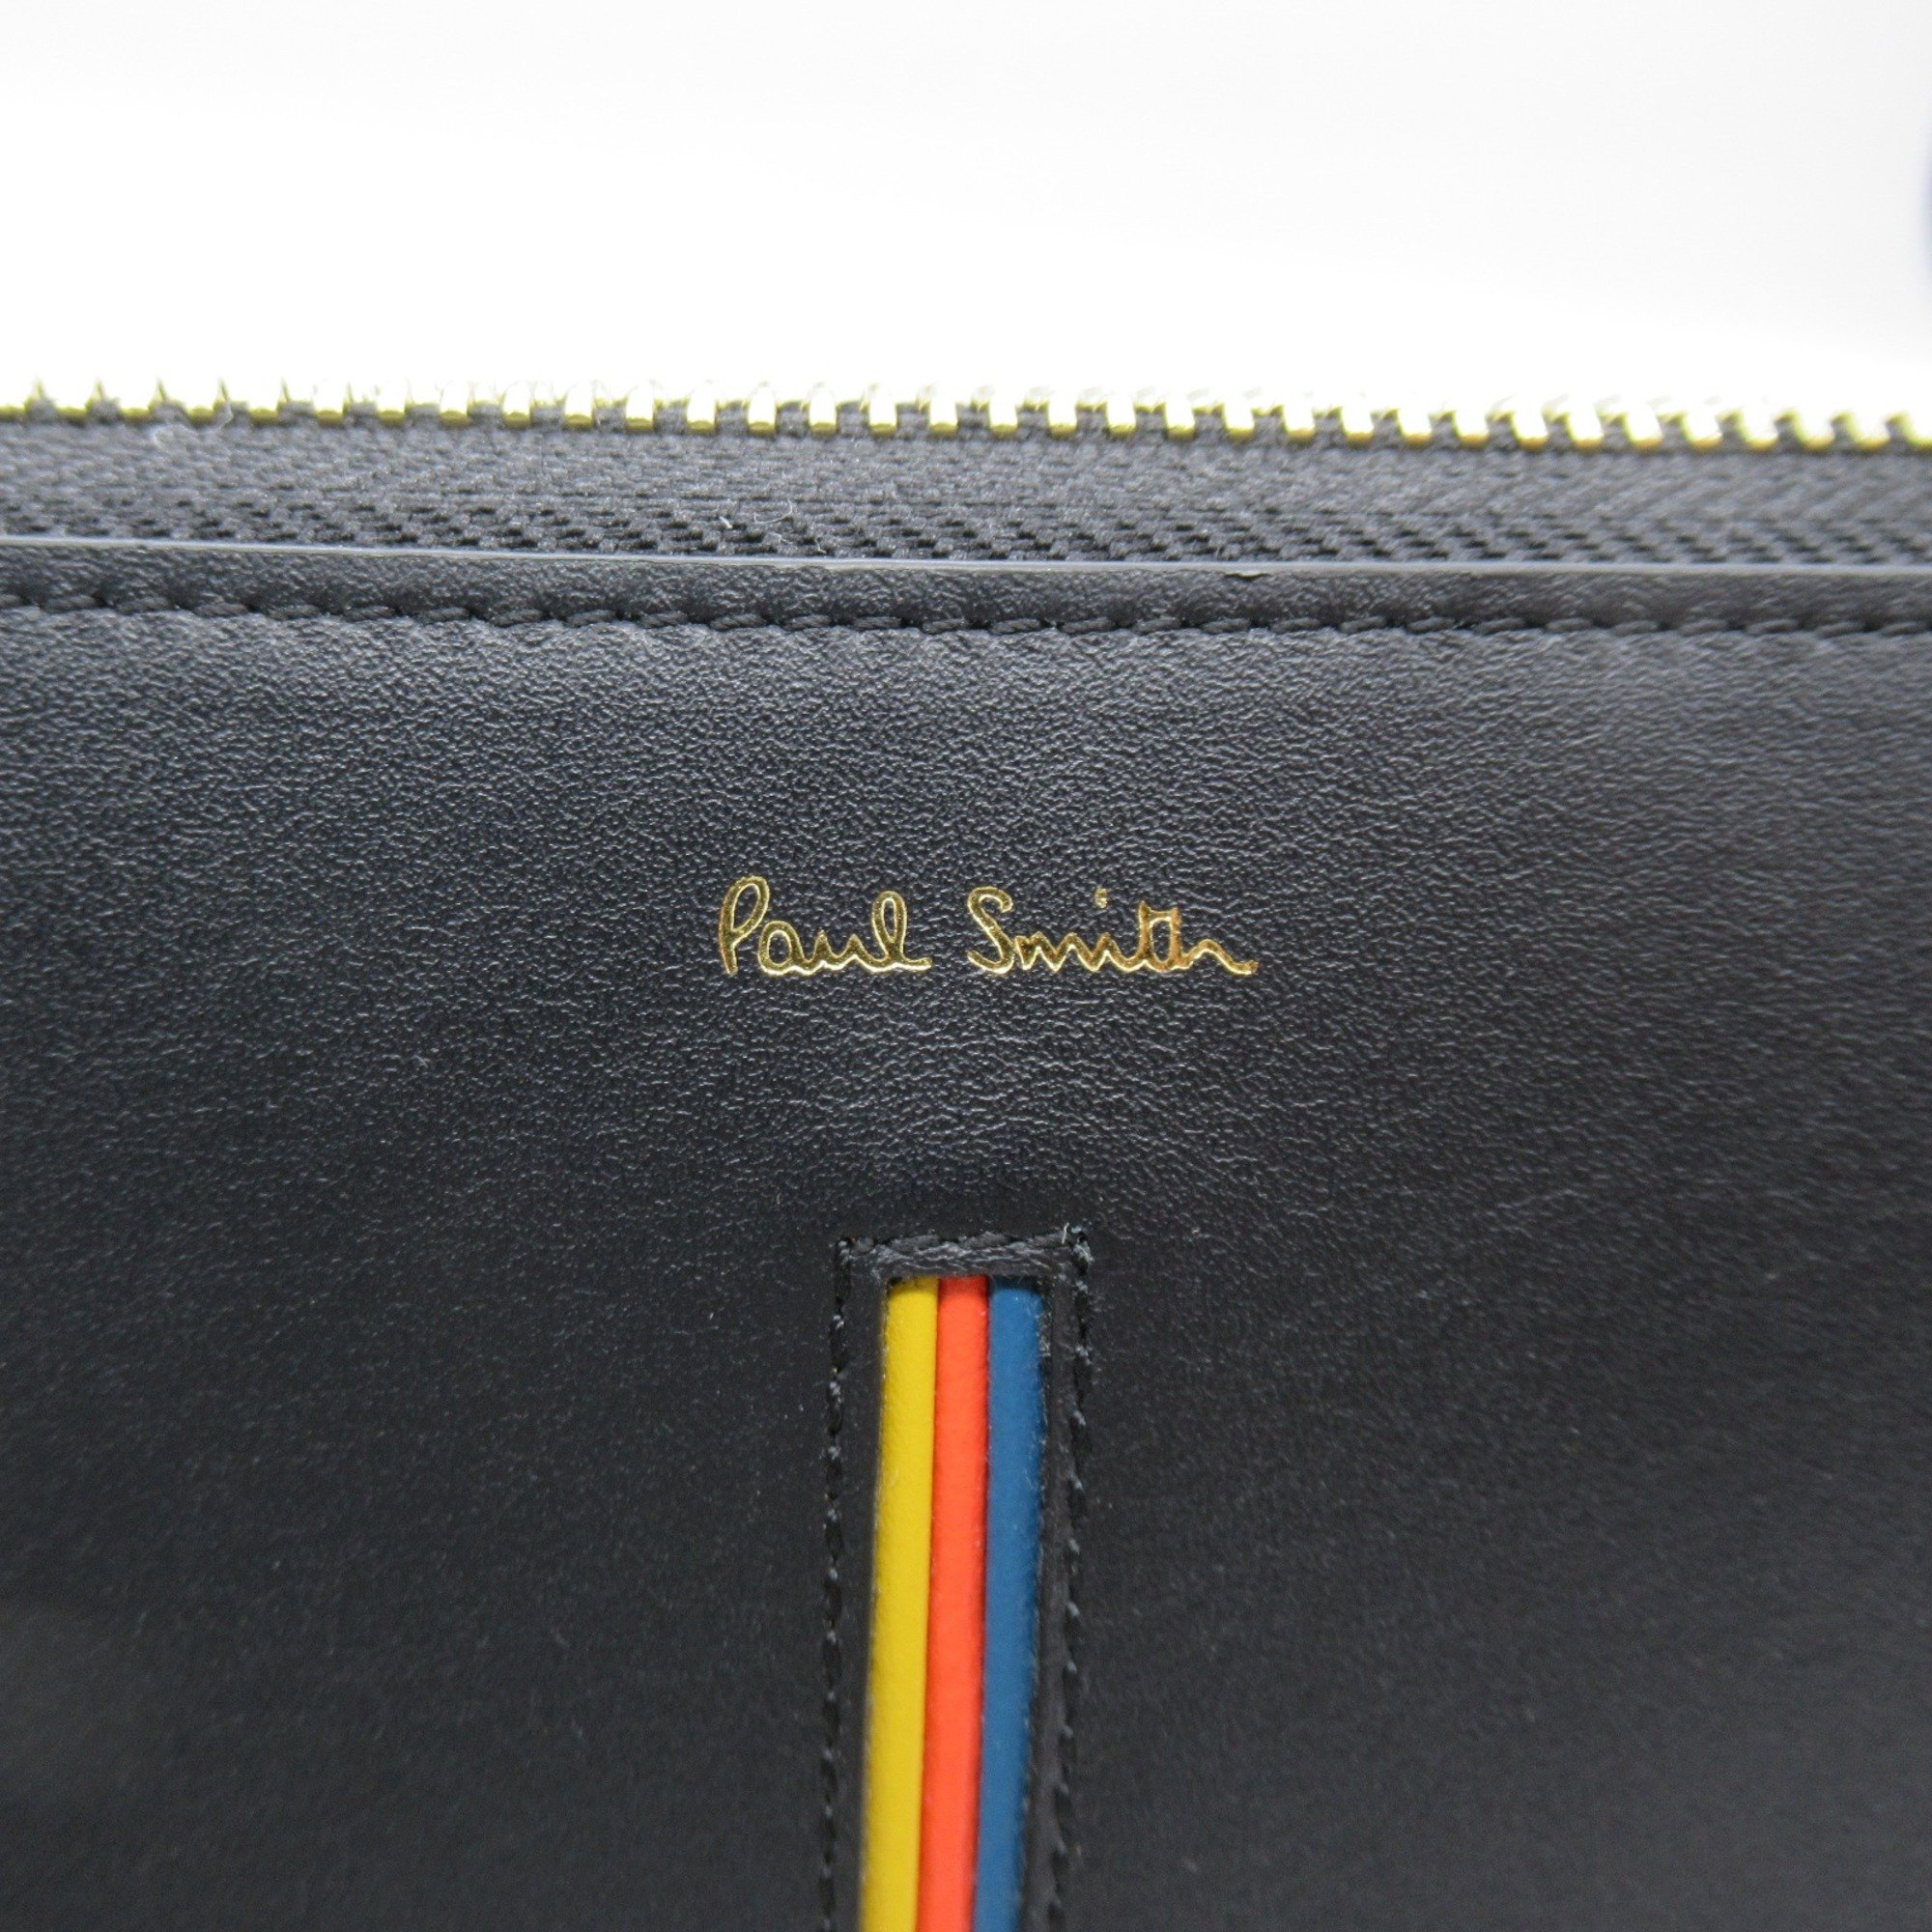 Paul Smith Round long wallet Black leather 477879